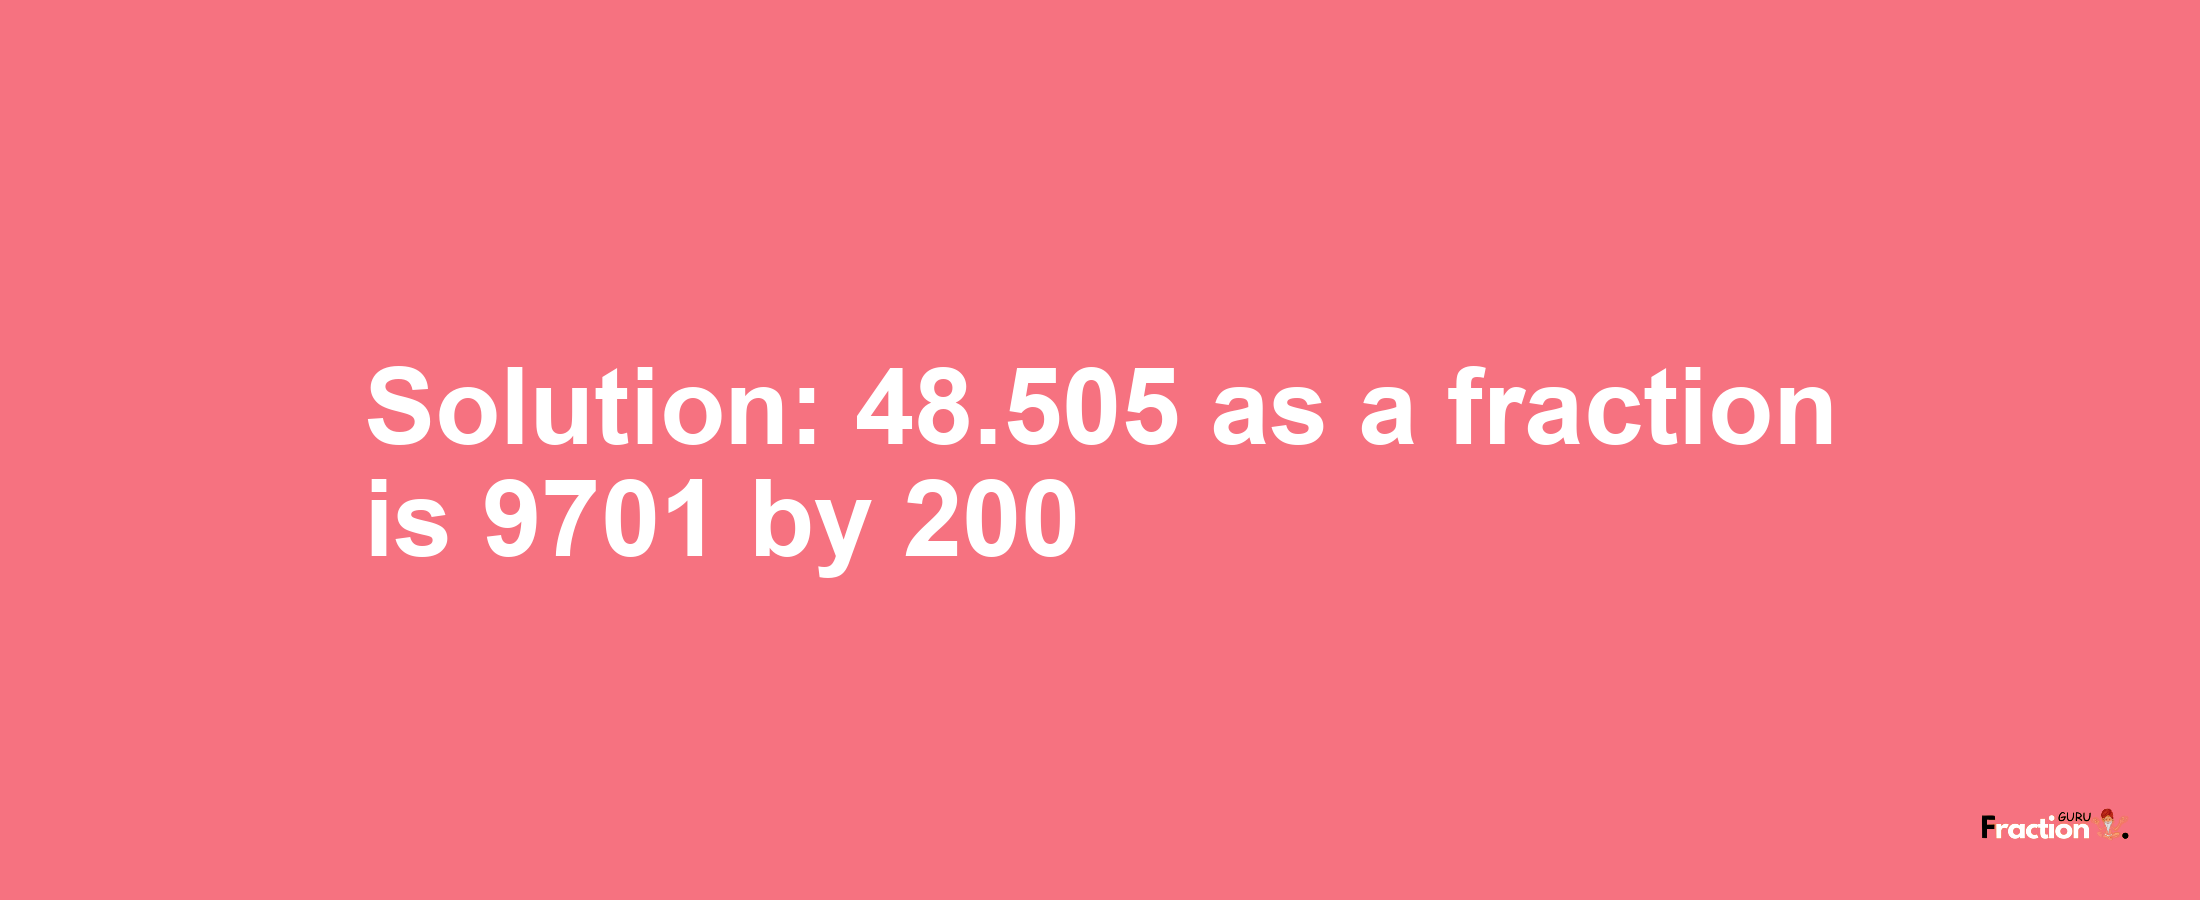 Solution:48.505 as a fraction is 9701/200